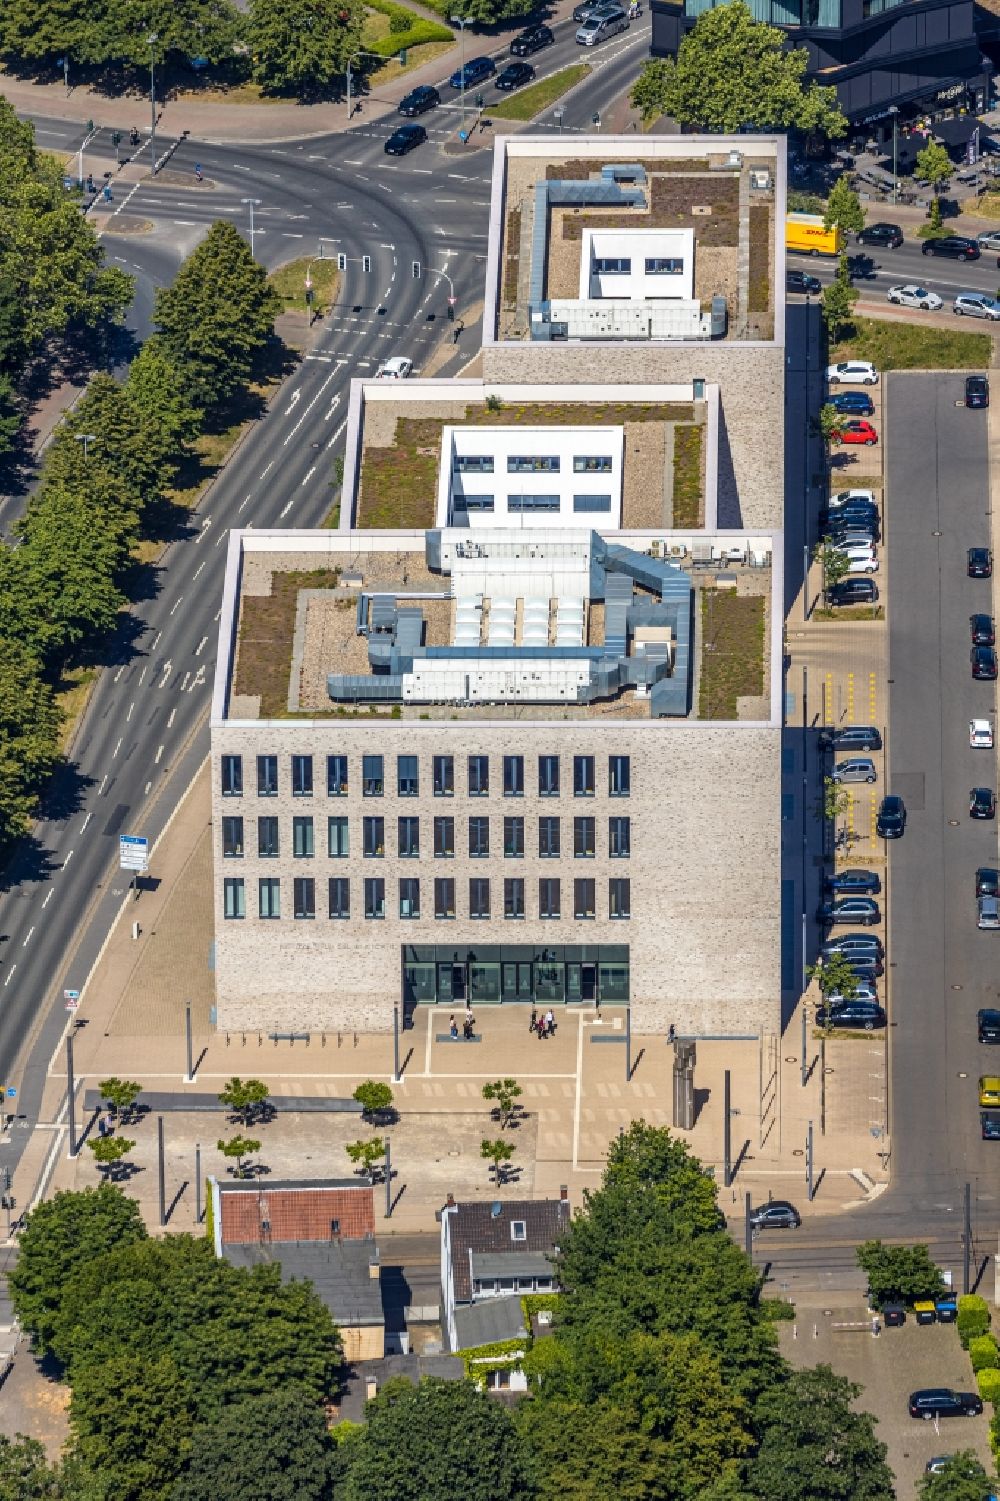 Gelsenkirchen from the bird's eye view: Building complex of the new center of Justice of Gelsenkirchen in the state of North Rhine-Westphalia